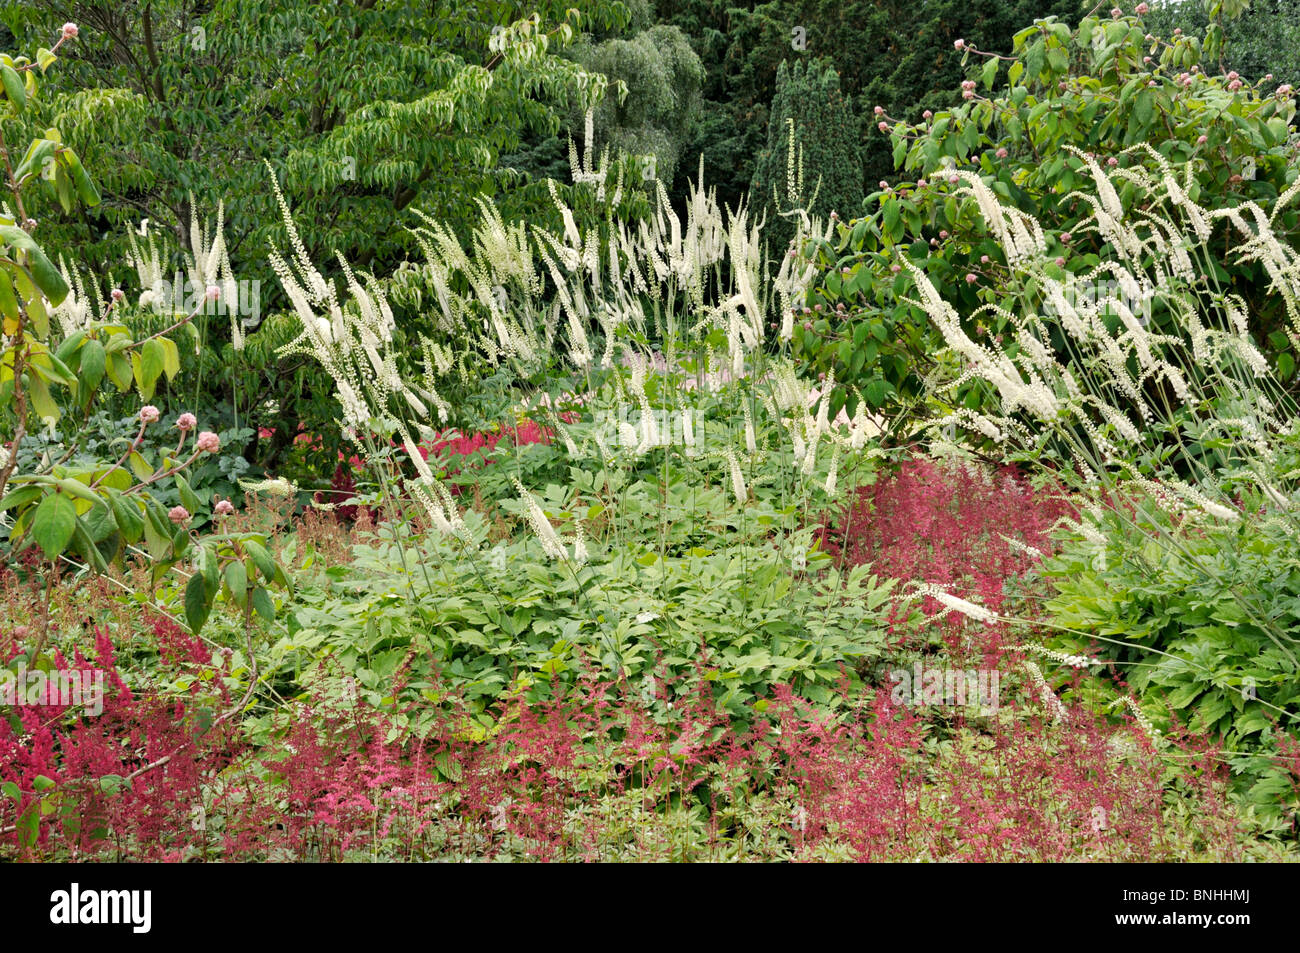 Black cohosh (Cimicifuga racemosa syn. Actaea racemosa) and astilbes (Astilbe) Stock Photo